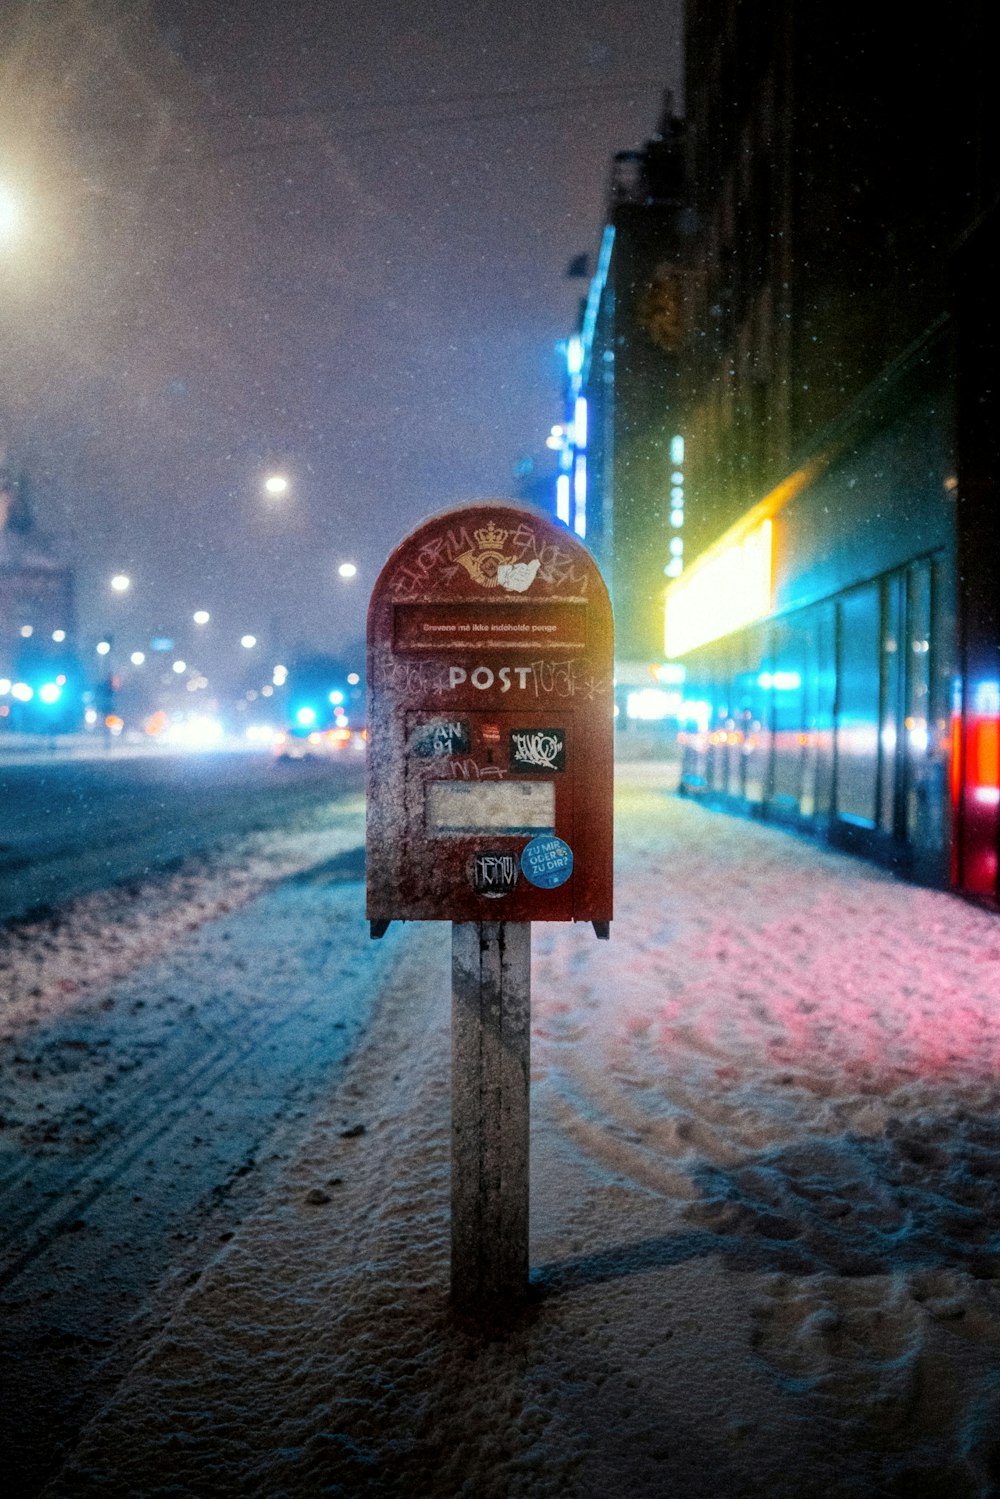 a parking meter on a snowy street